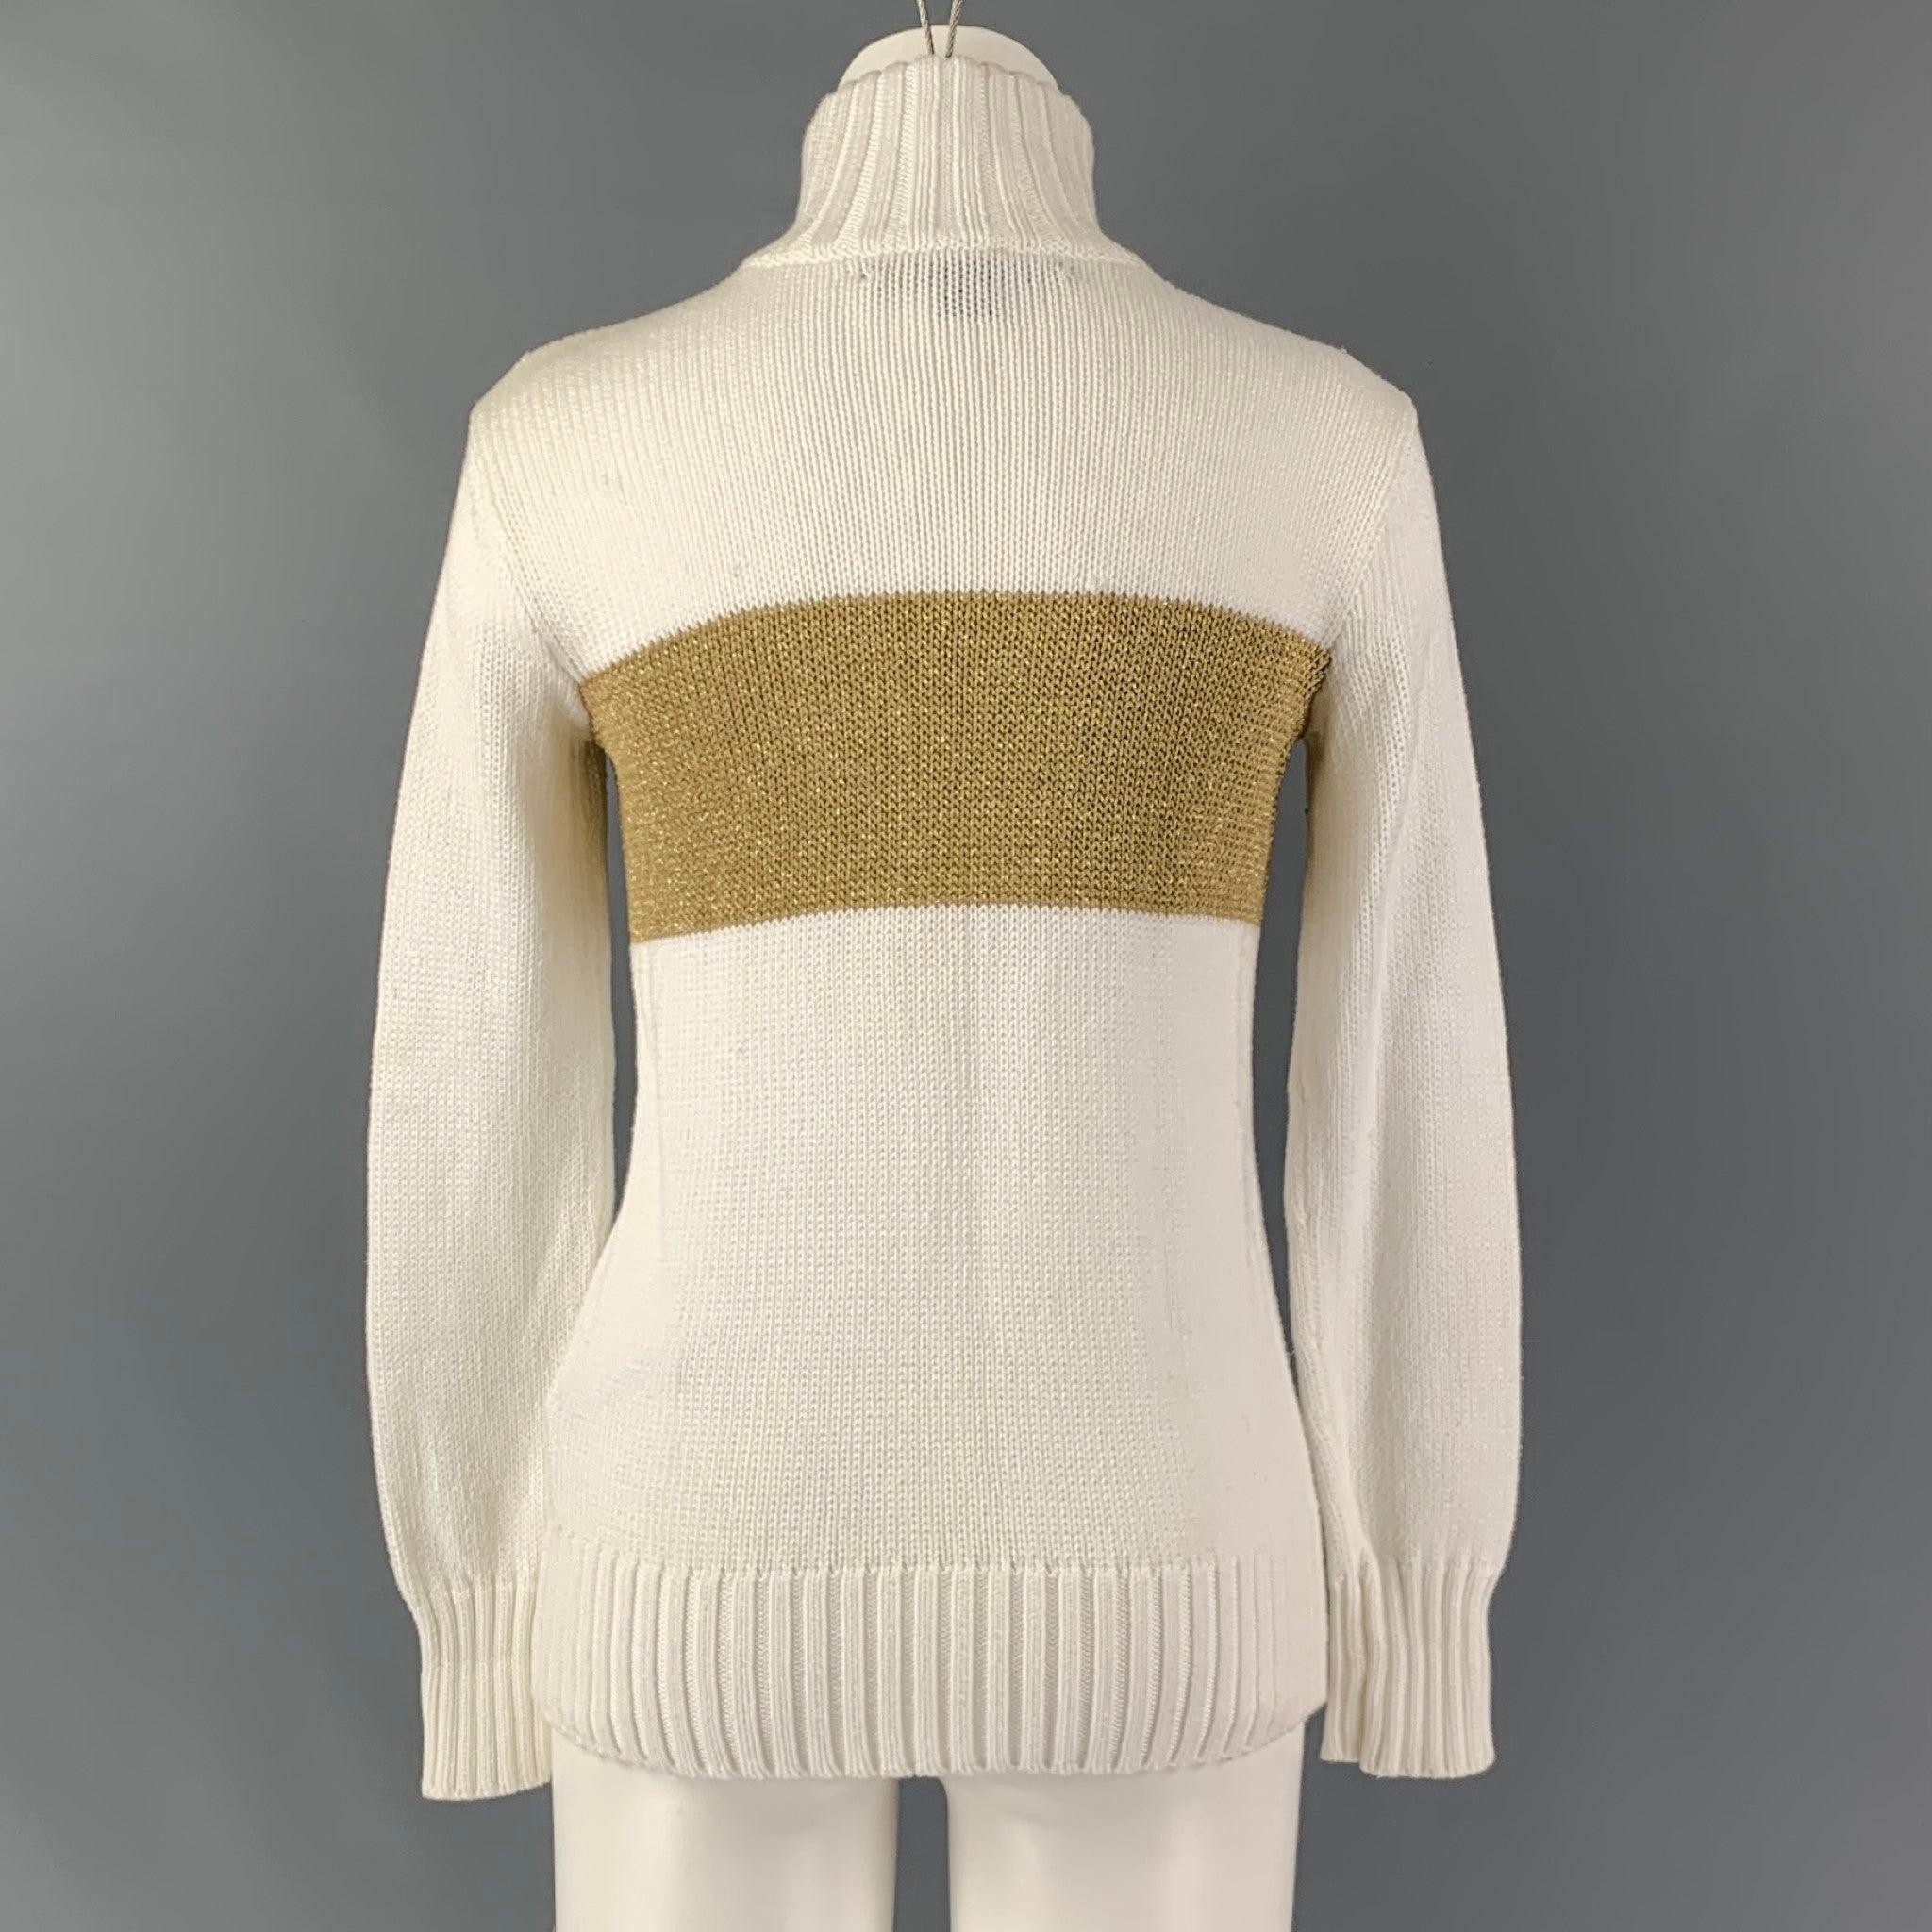 RALPH LAUREN Size XS Cream Gold Cotton Blend Color Block Sweater In Excellent Condition For Sale In San Francisco, CA